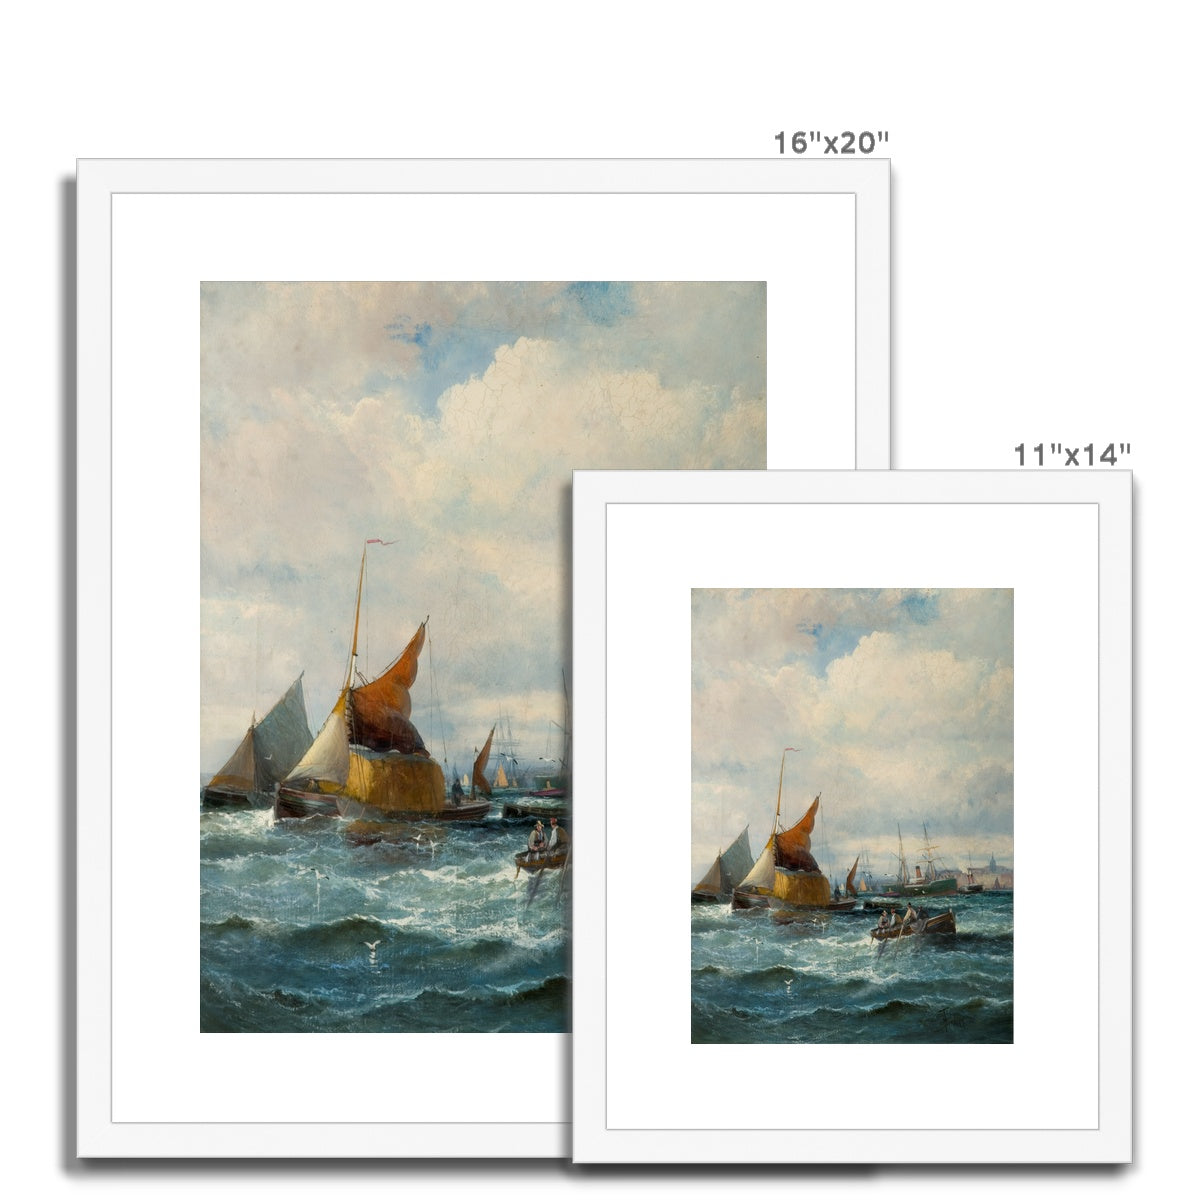 Fine Art Print Framed & Mounted - Shipping off a Headland by Georges Thornley